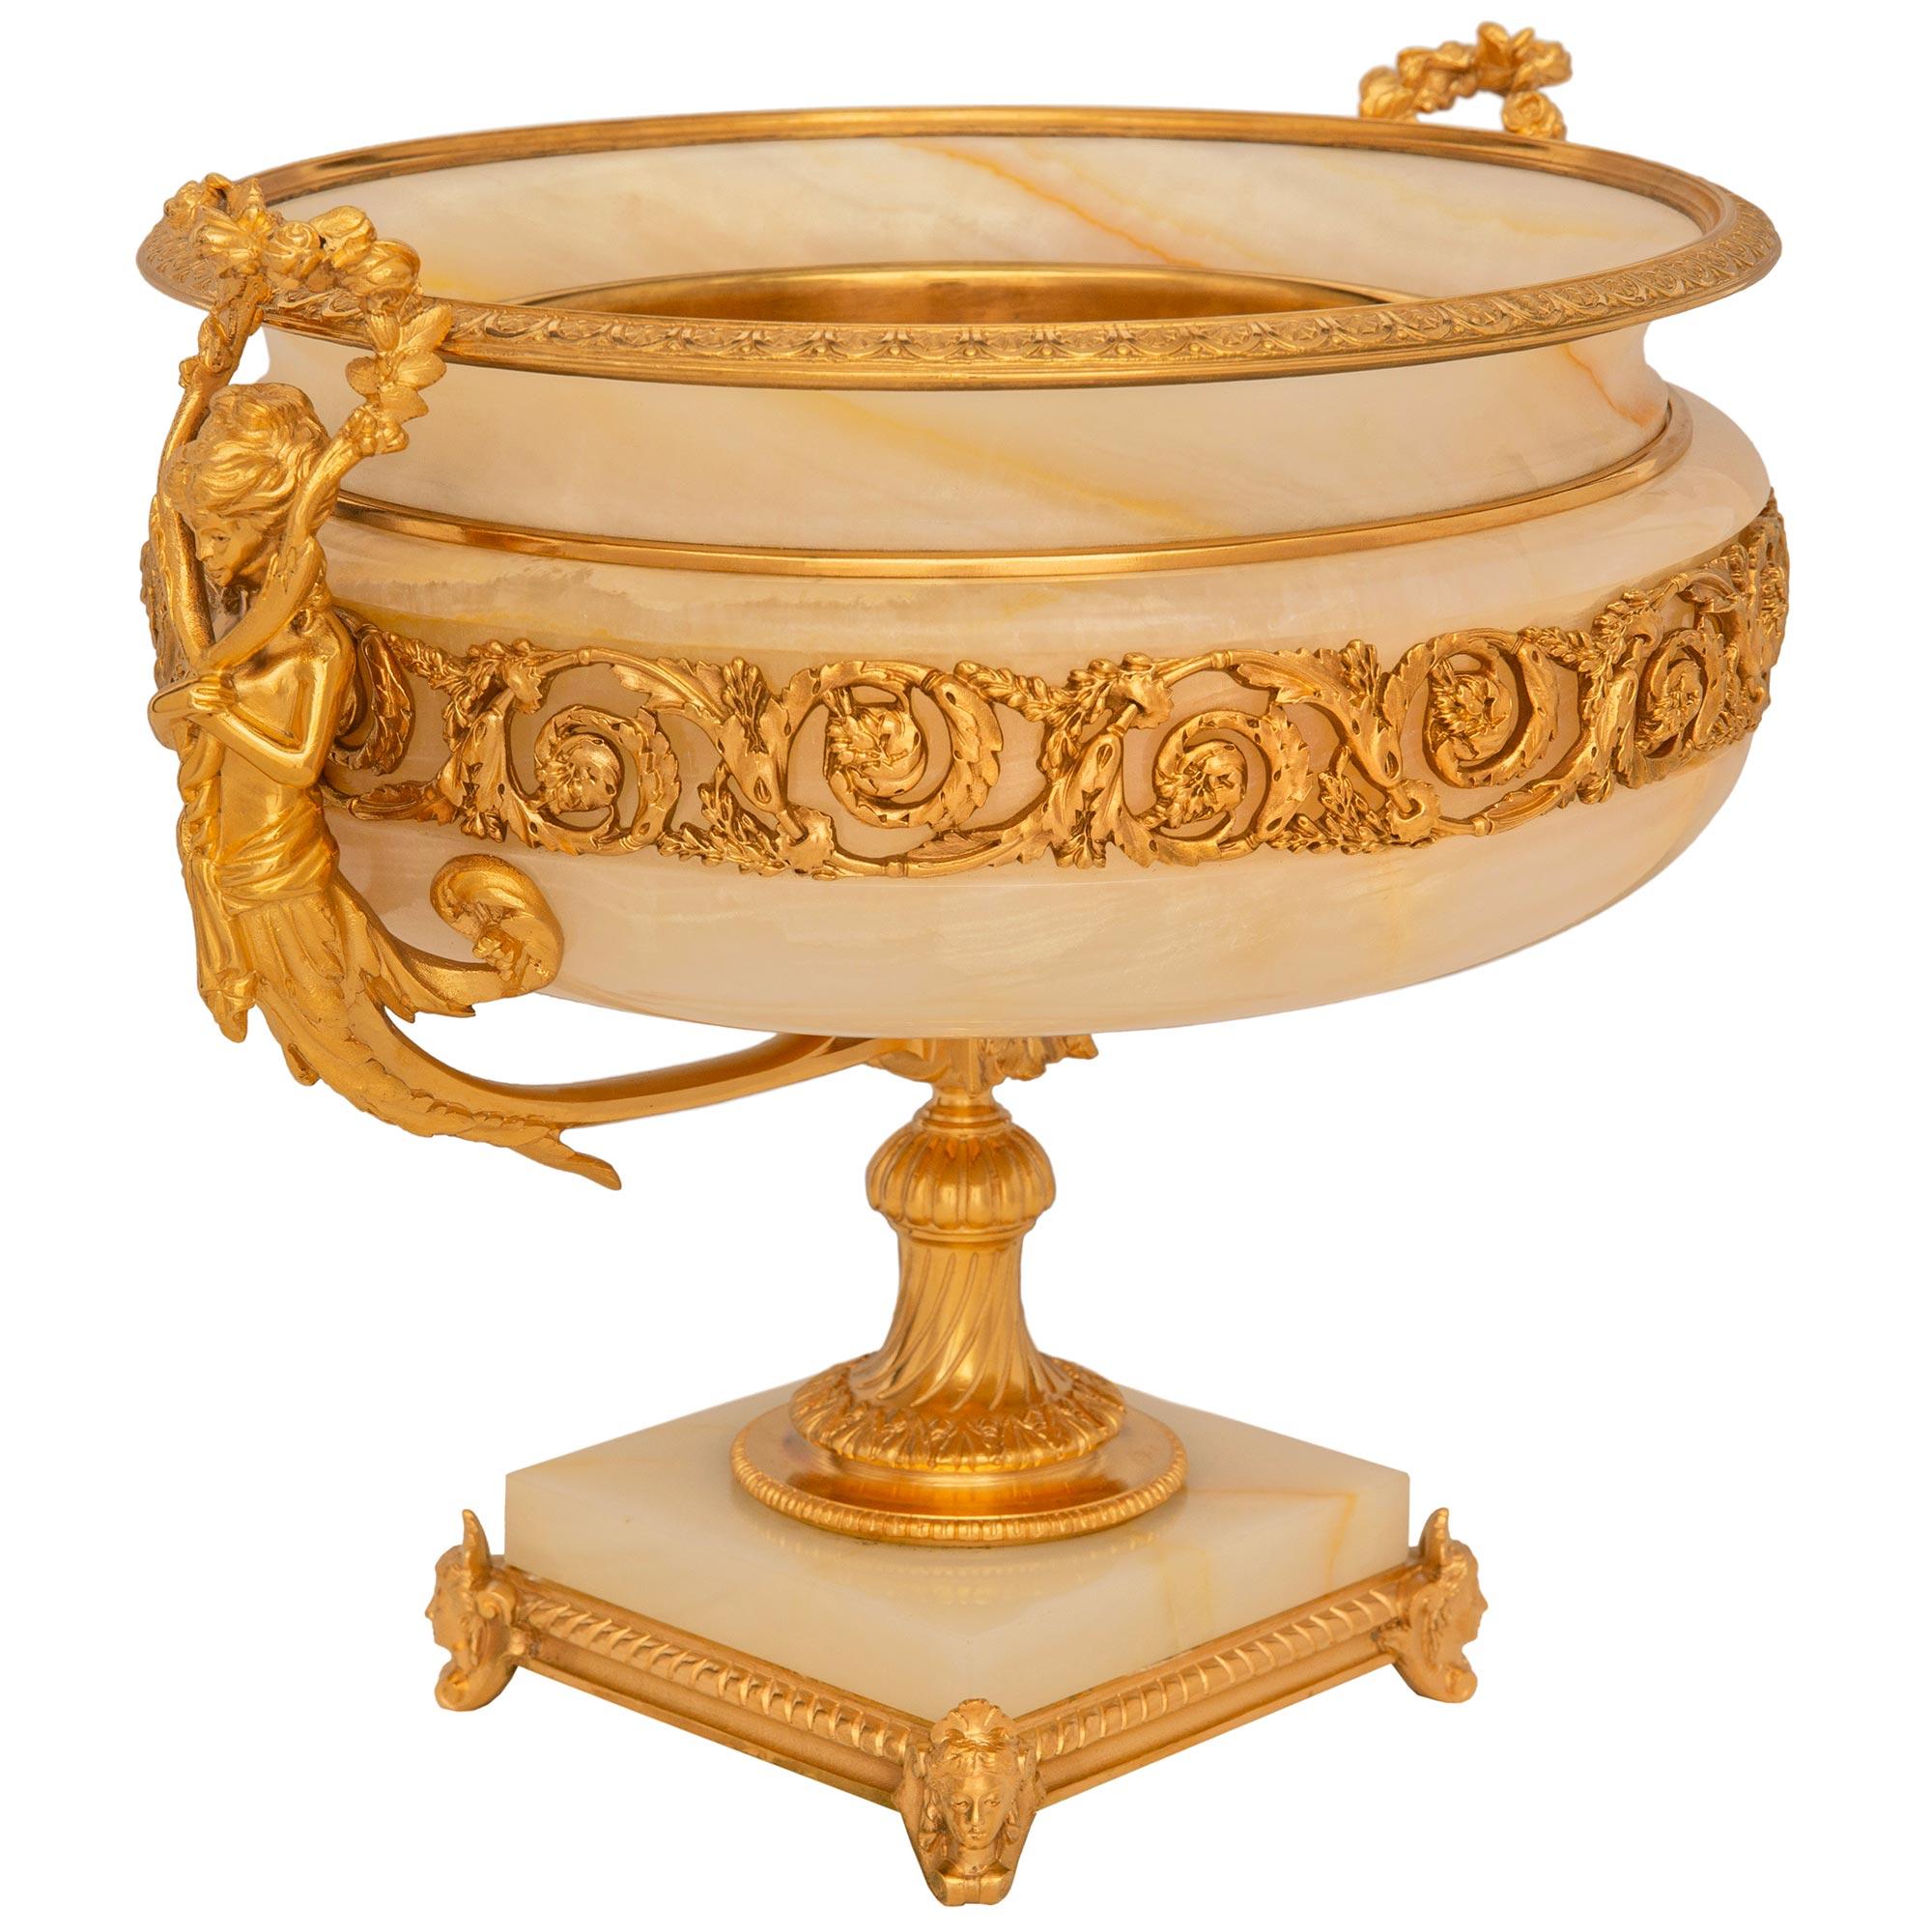 French 19th century Louis XVI st. Onyx and Ormolu urn/centerpiece In Good Condition For Sale In West Palm Beach, FL